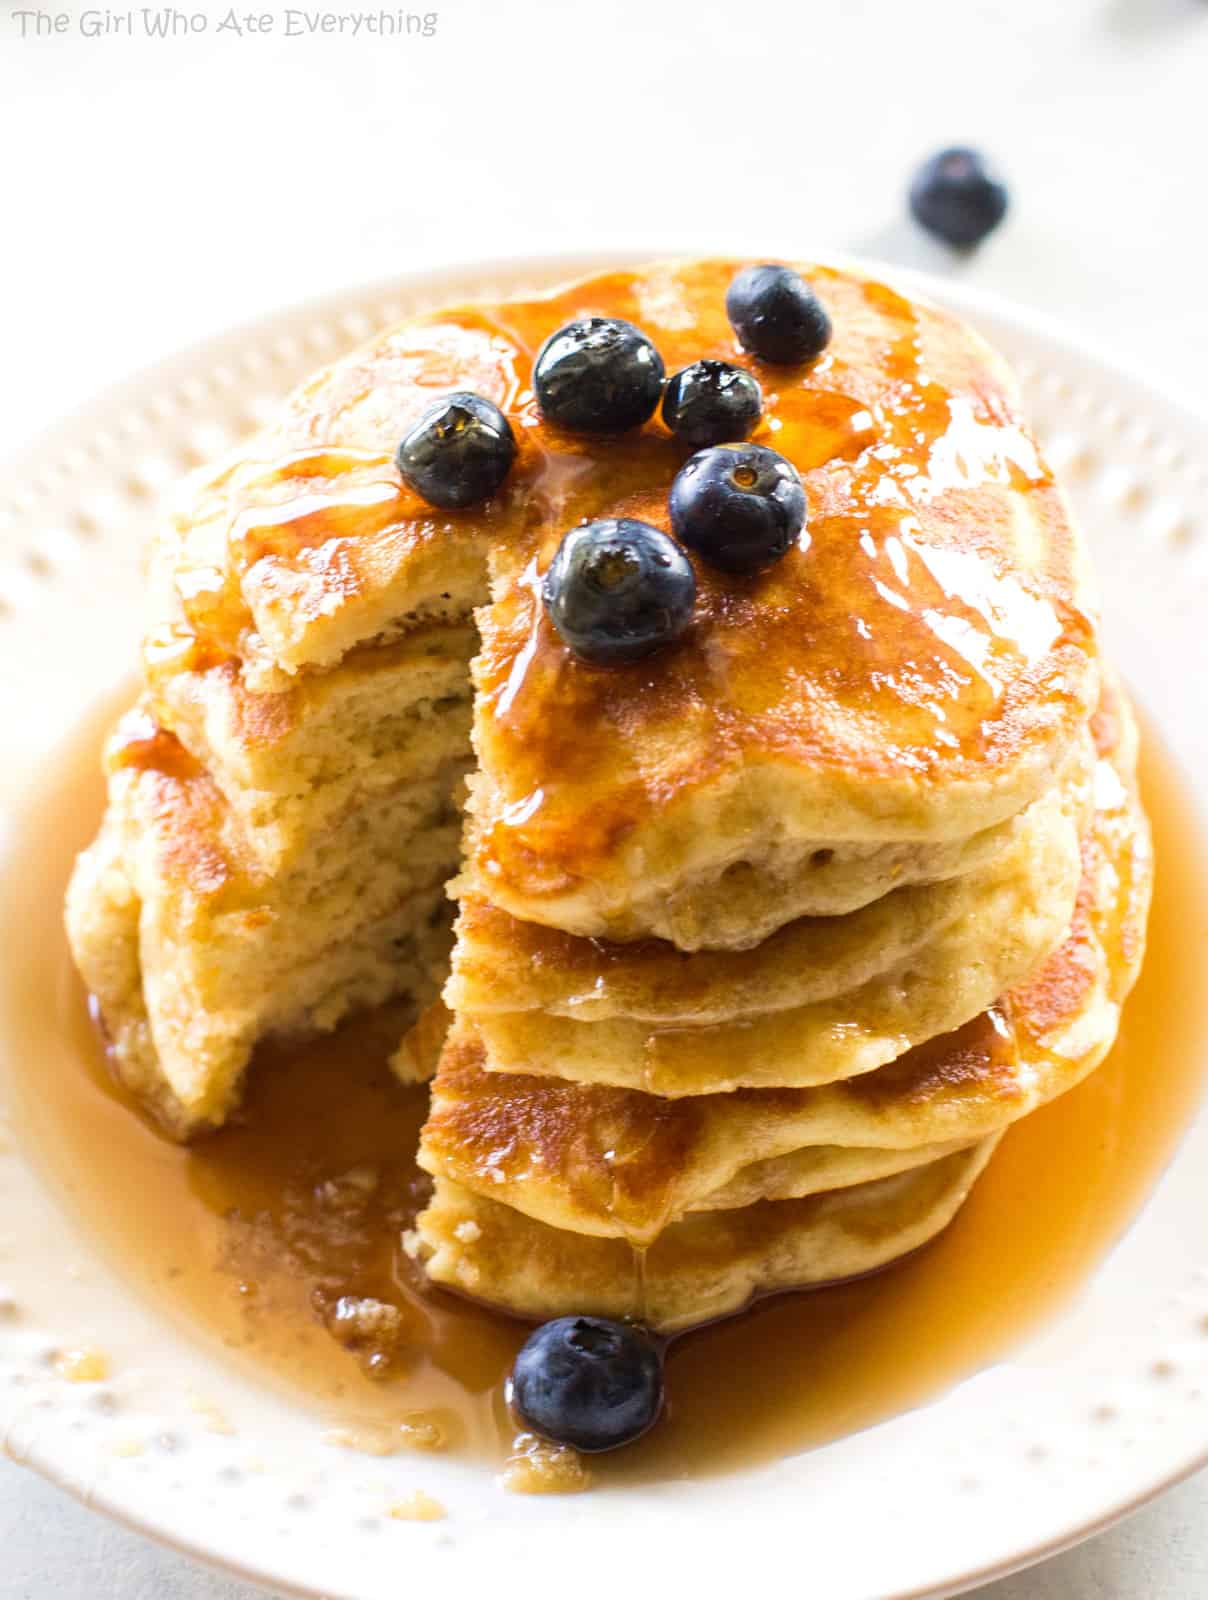 Fluffy pancakes and blueberries with syrup on a plate